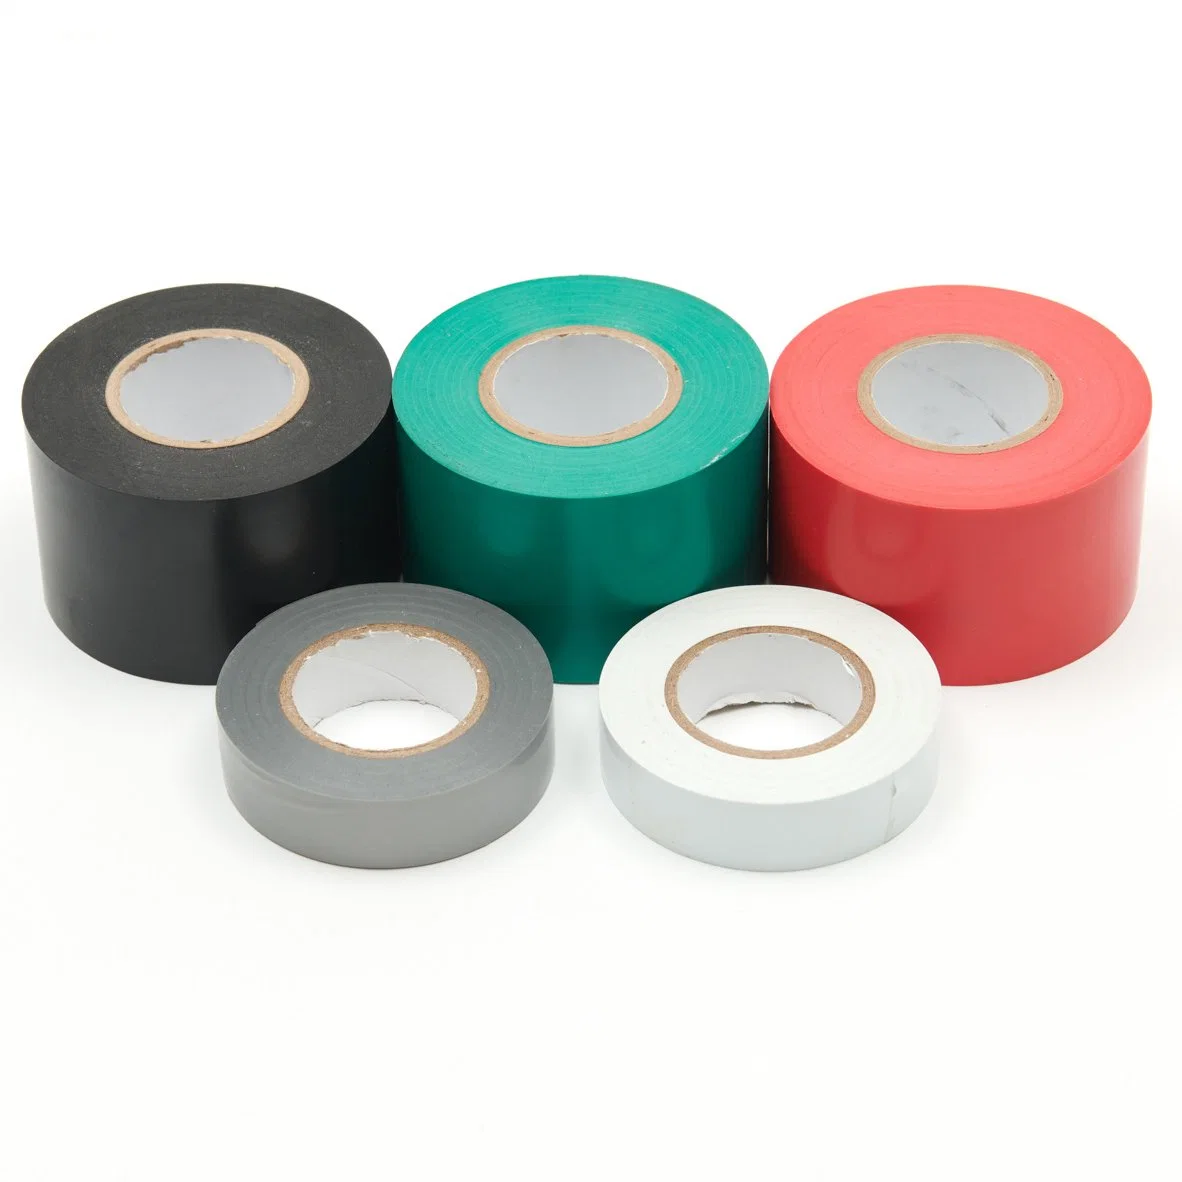 Insulation Material Adhestive PVC Duct Tape